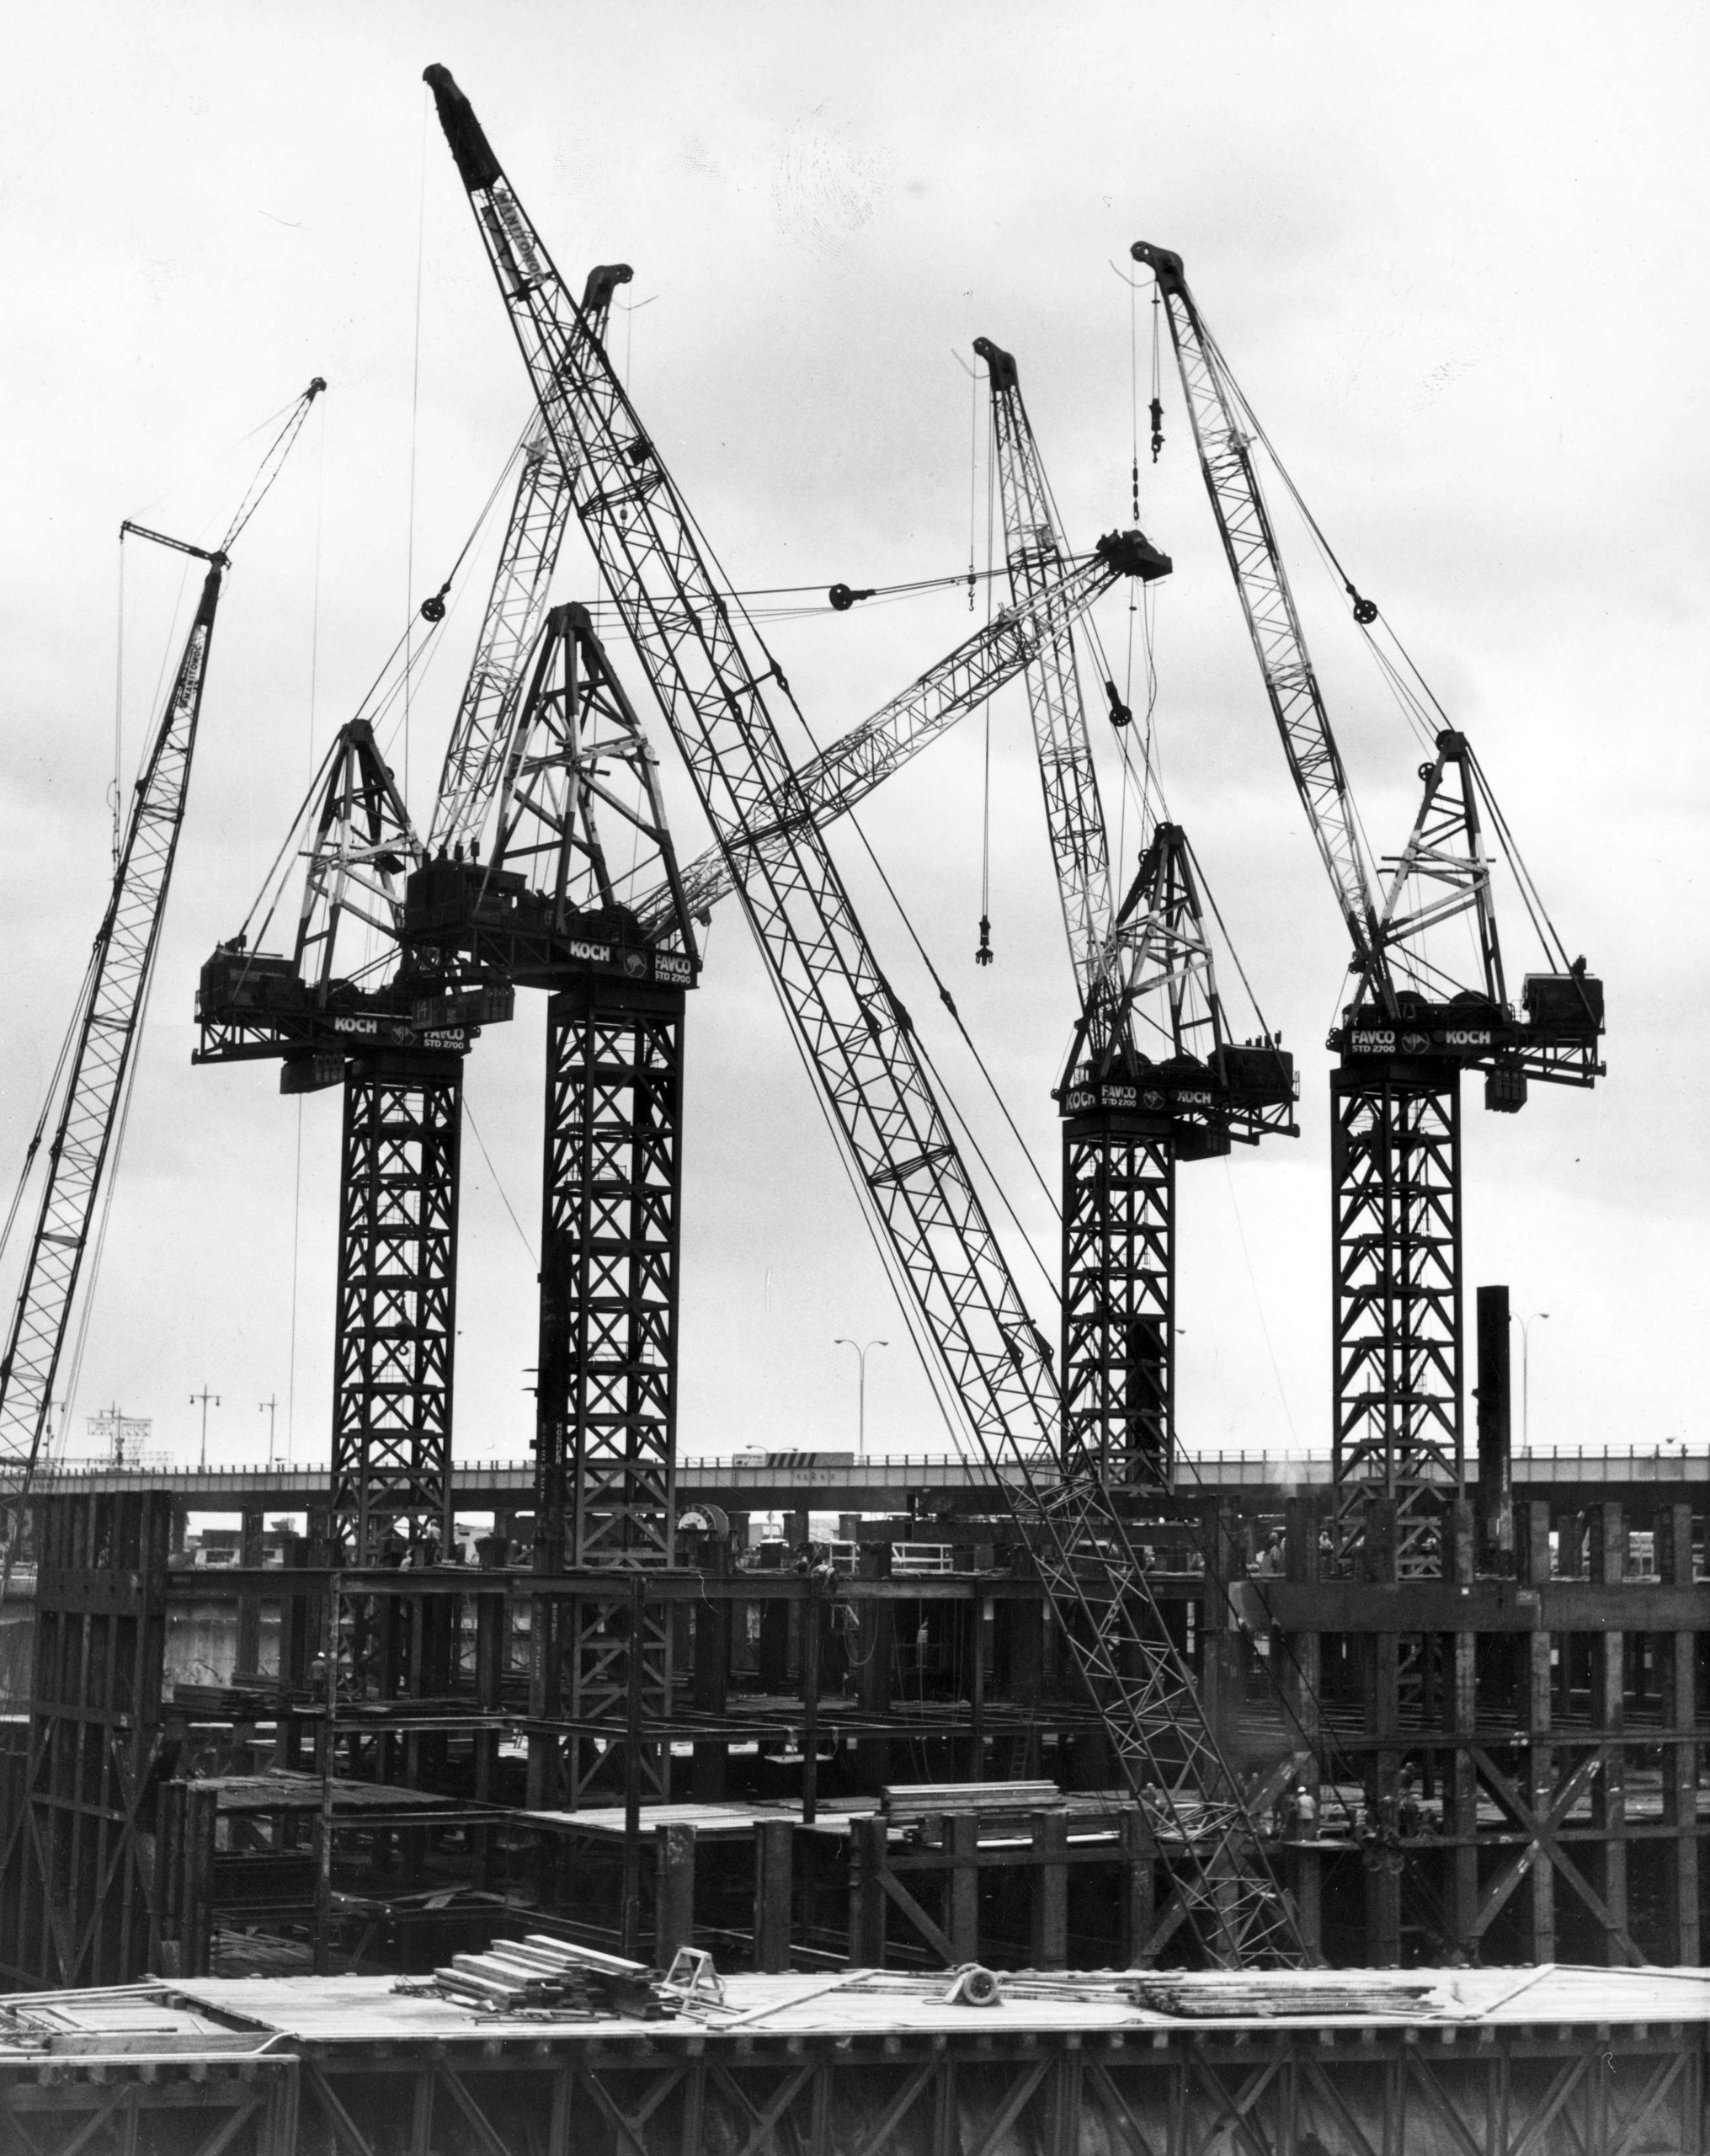 Kangaroo cranes in position at the excavation site for the World Trade Center in New York, December 13, 1968.